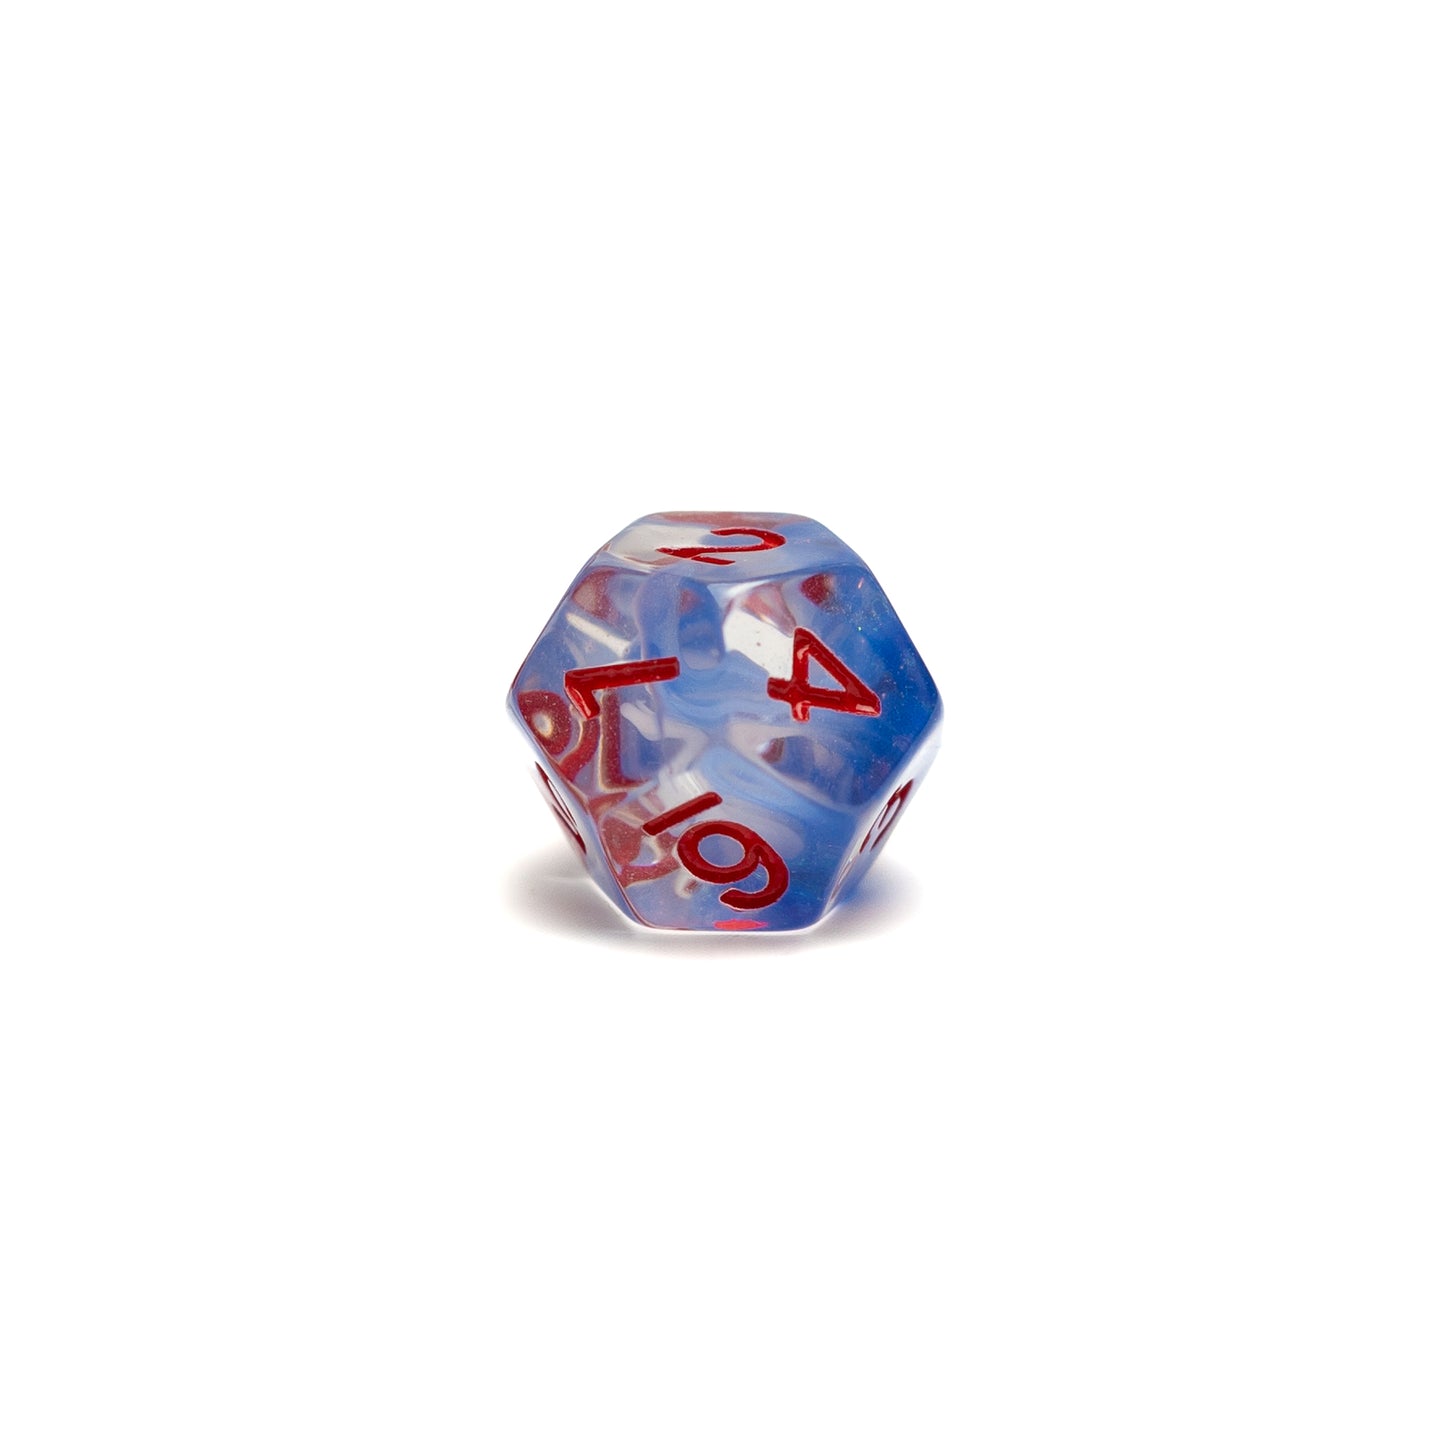 Roll Britannia Acrylic Dungeons and Dragons D12 Dice with Red and Blue Ocean Aesthetic